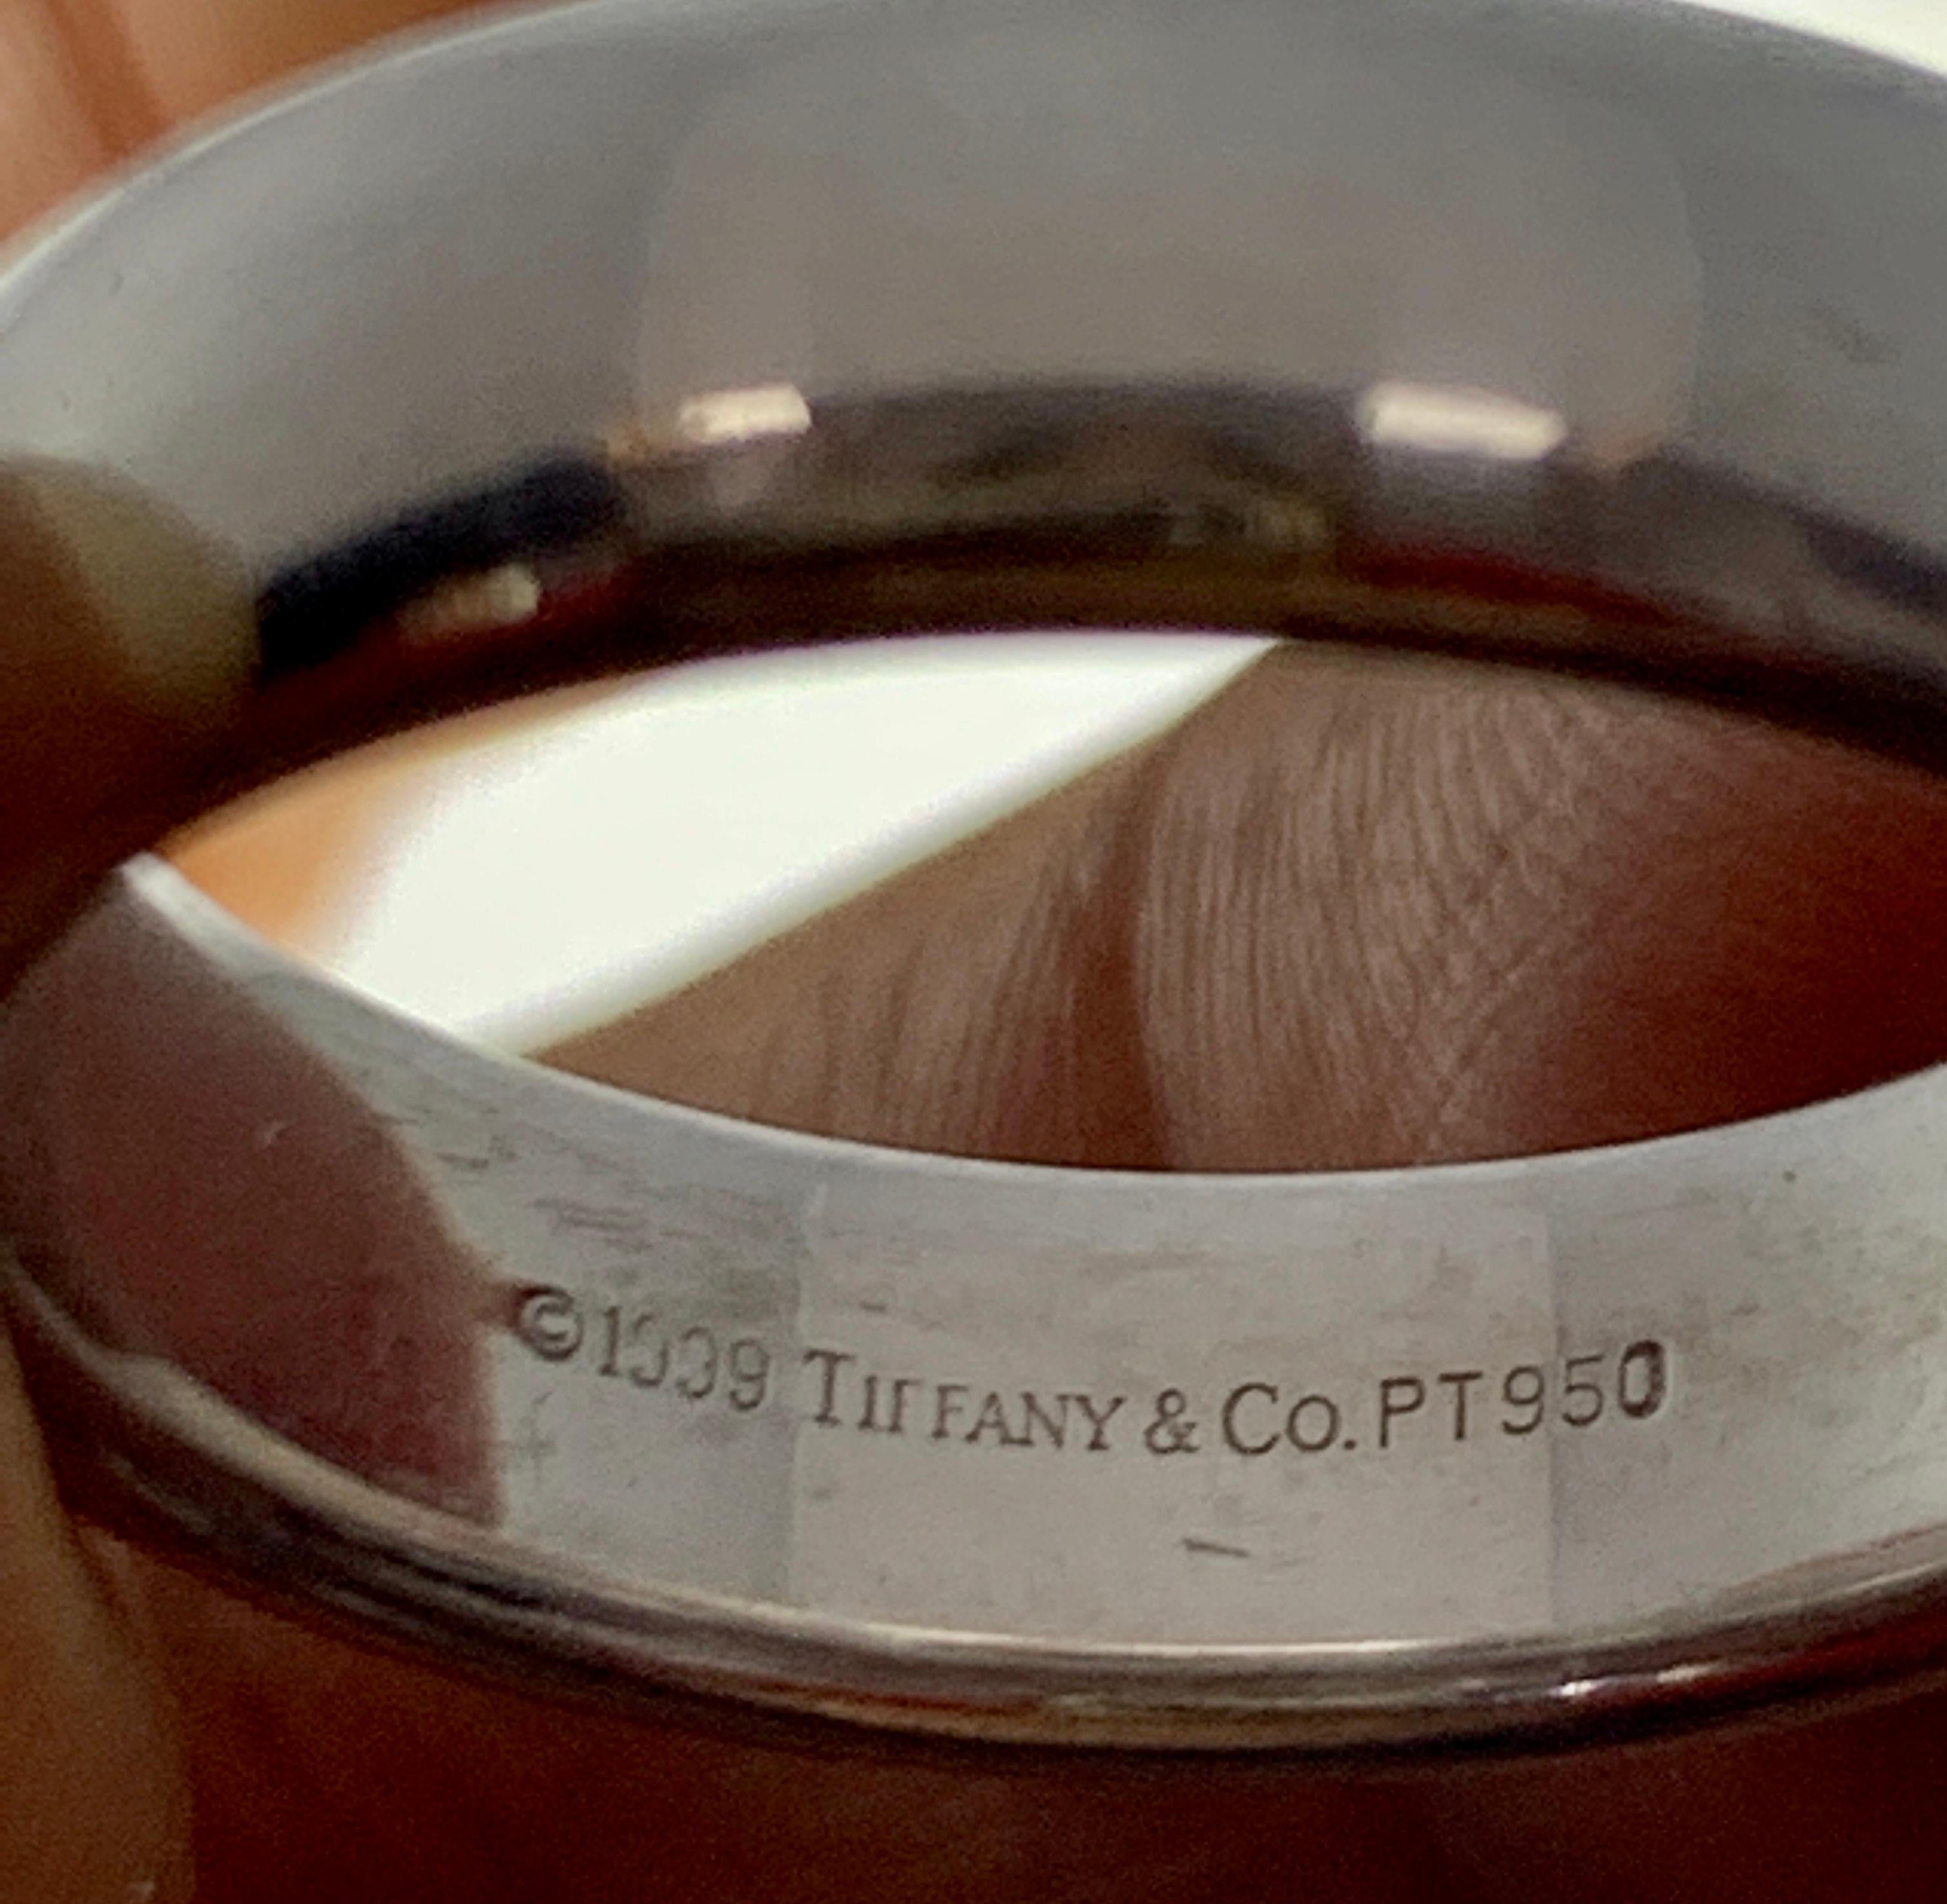 Tiffany & Co. Platinum Wide Plain Wedding Band Ring 15 Grams, Estate In Excellent Condition For Sale In New York, NY